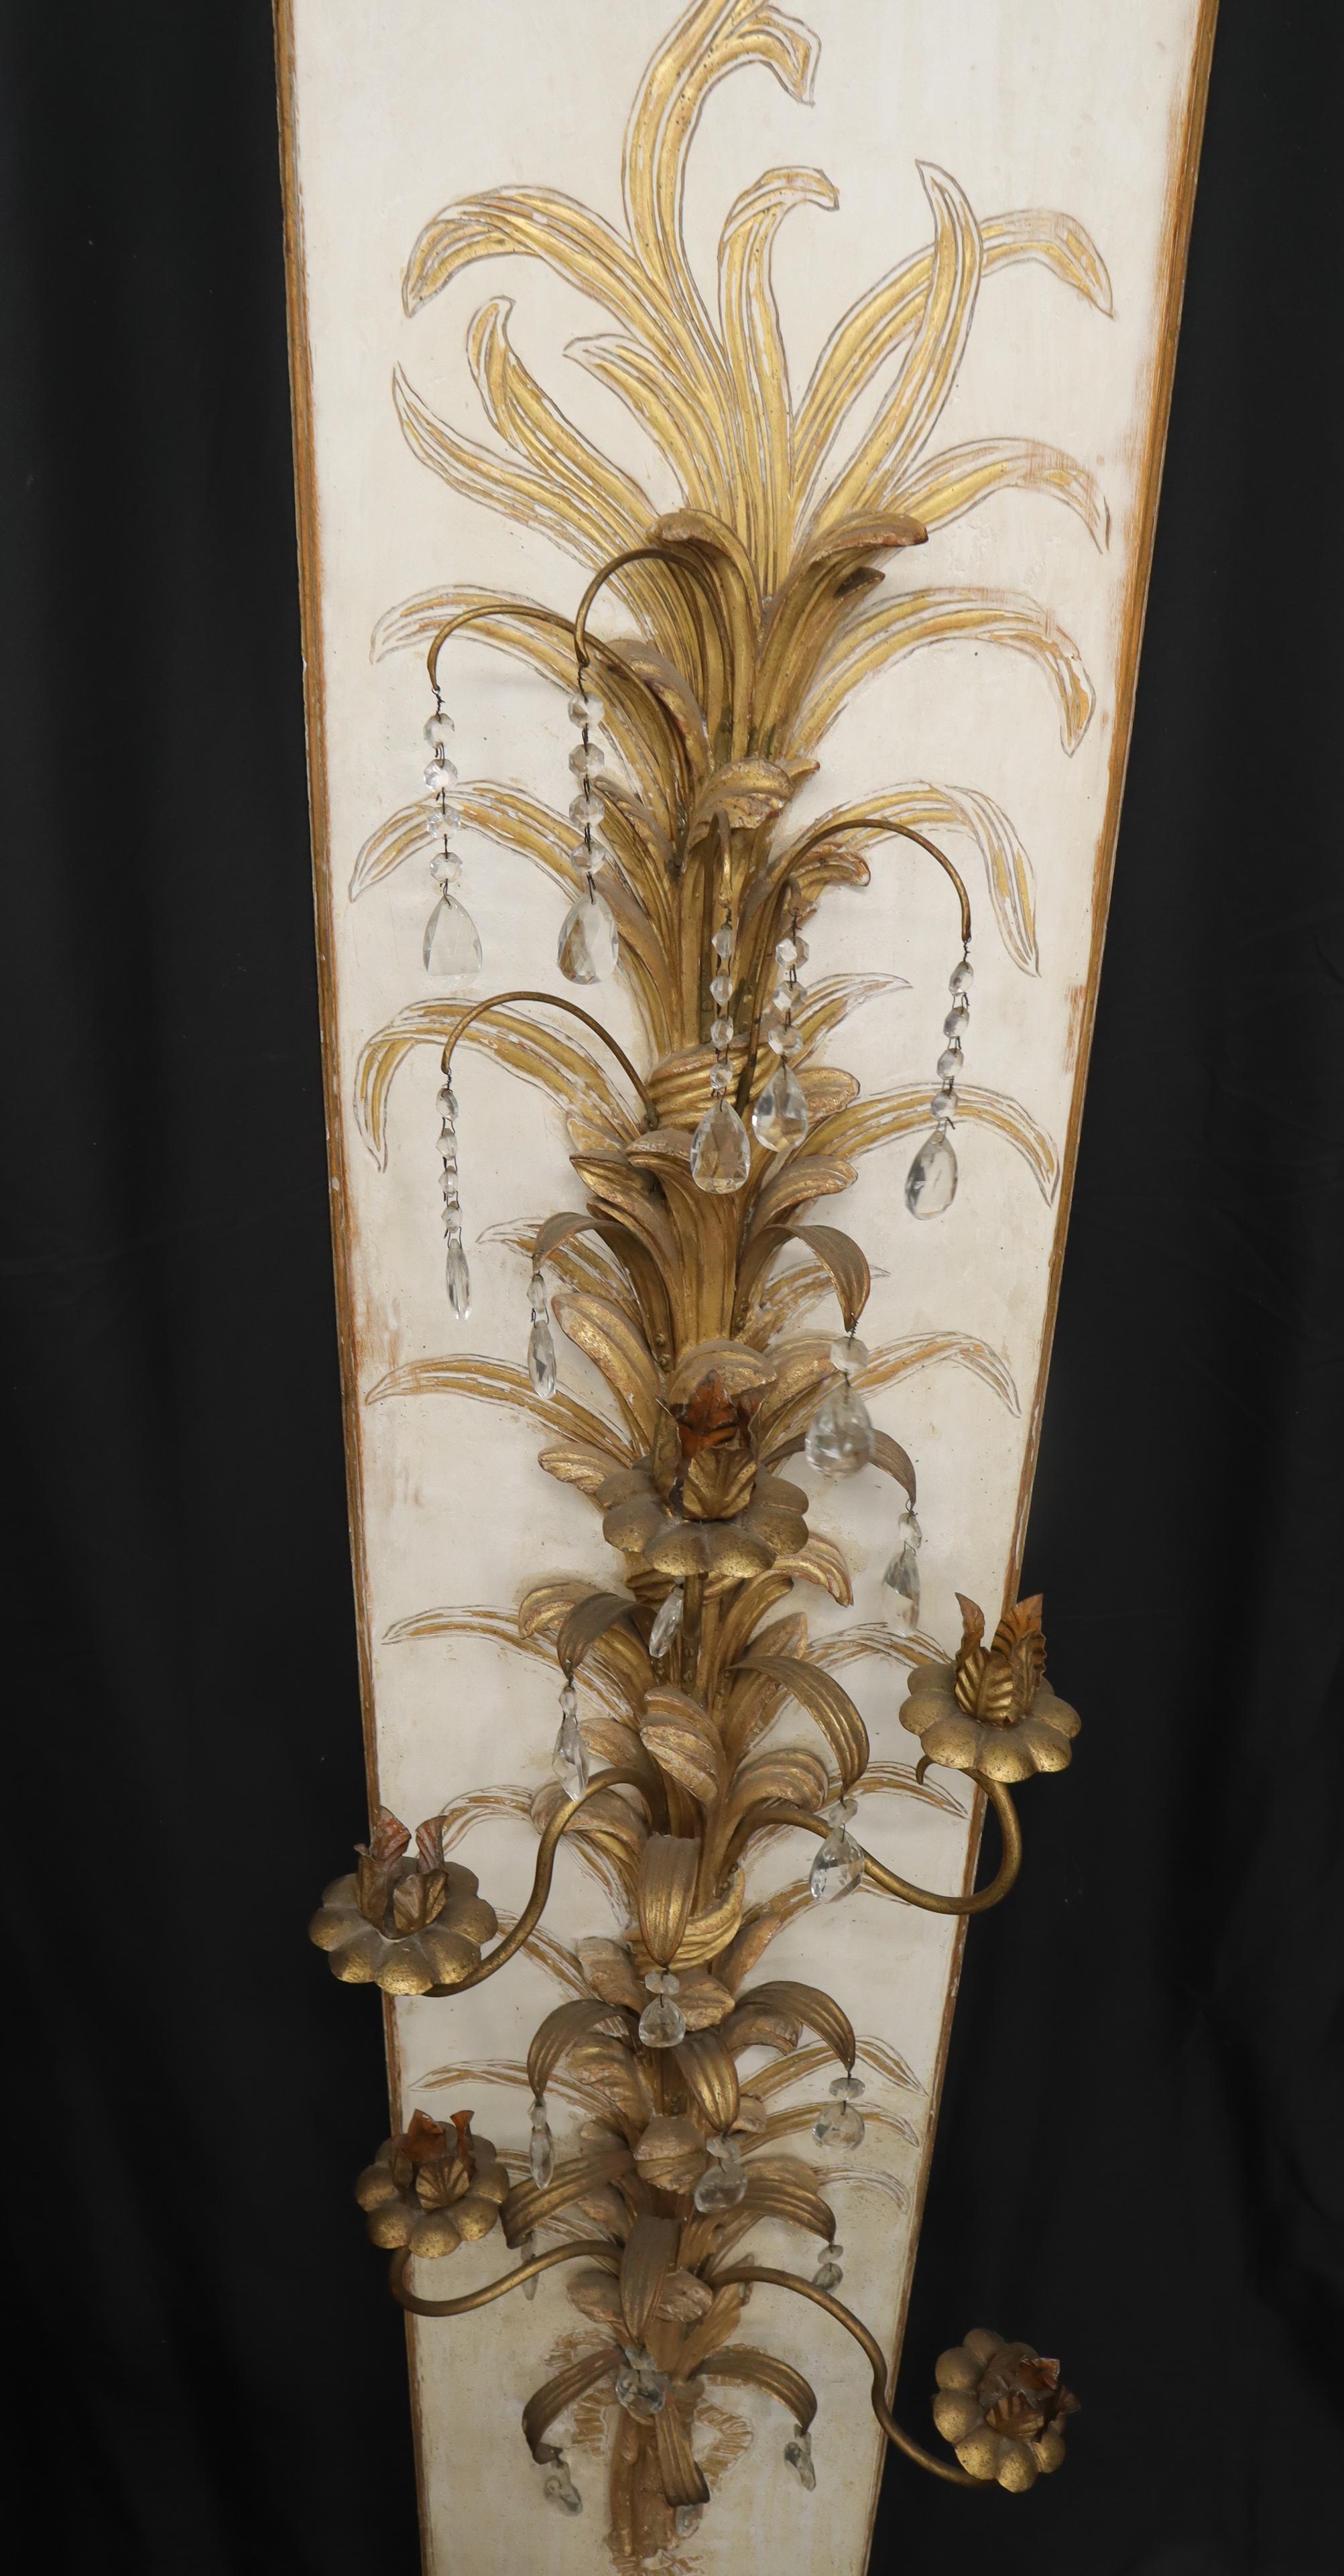 Rococo Revival Very Large Tall Gold Gilt Metal Crystal Decorated Wall Candle Holders Sconce For Sale